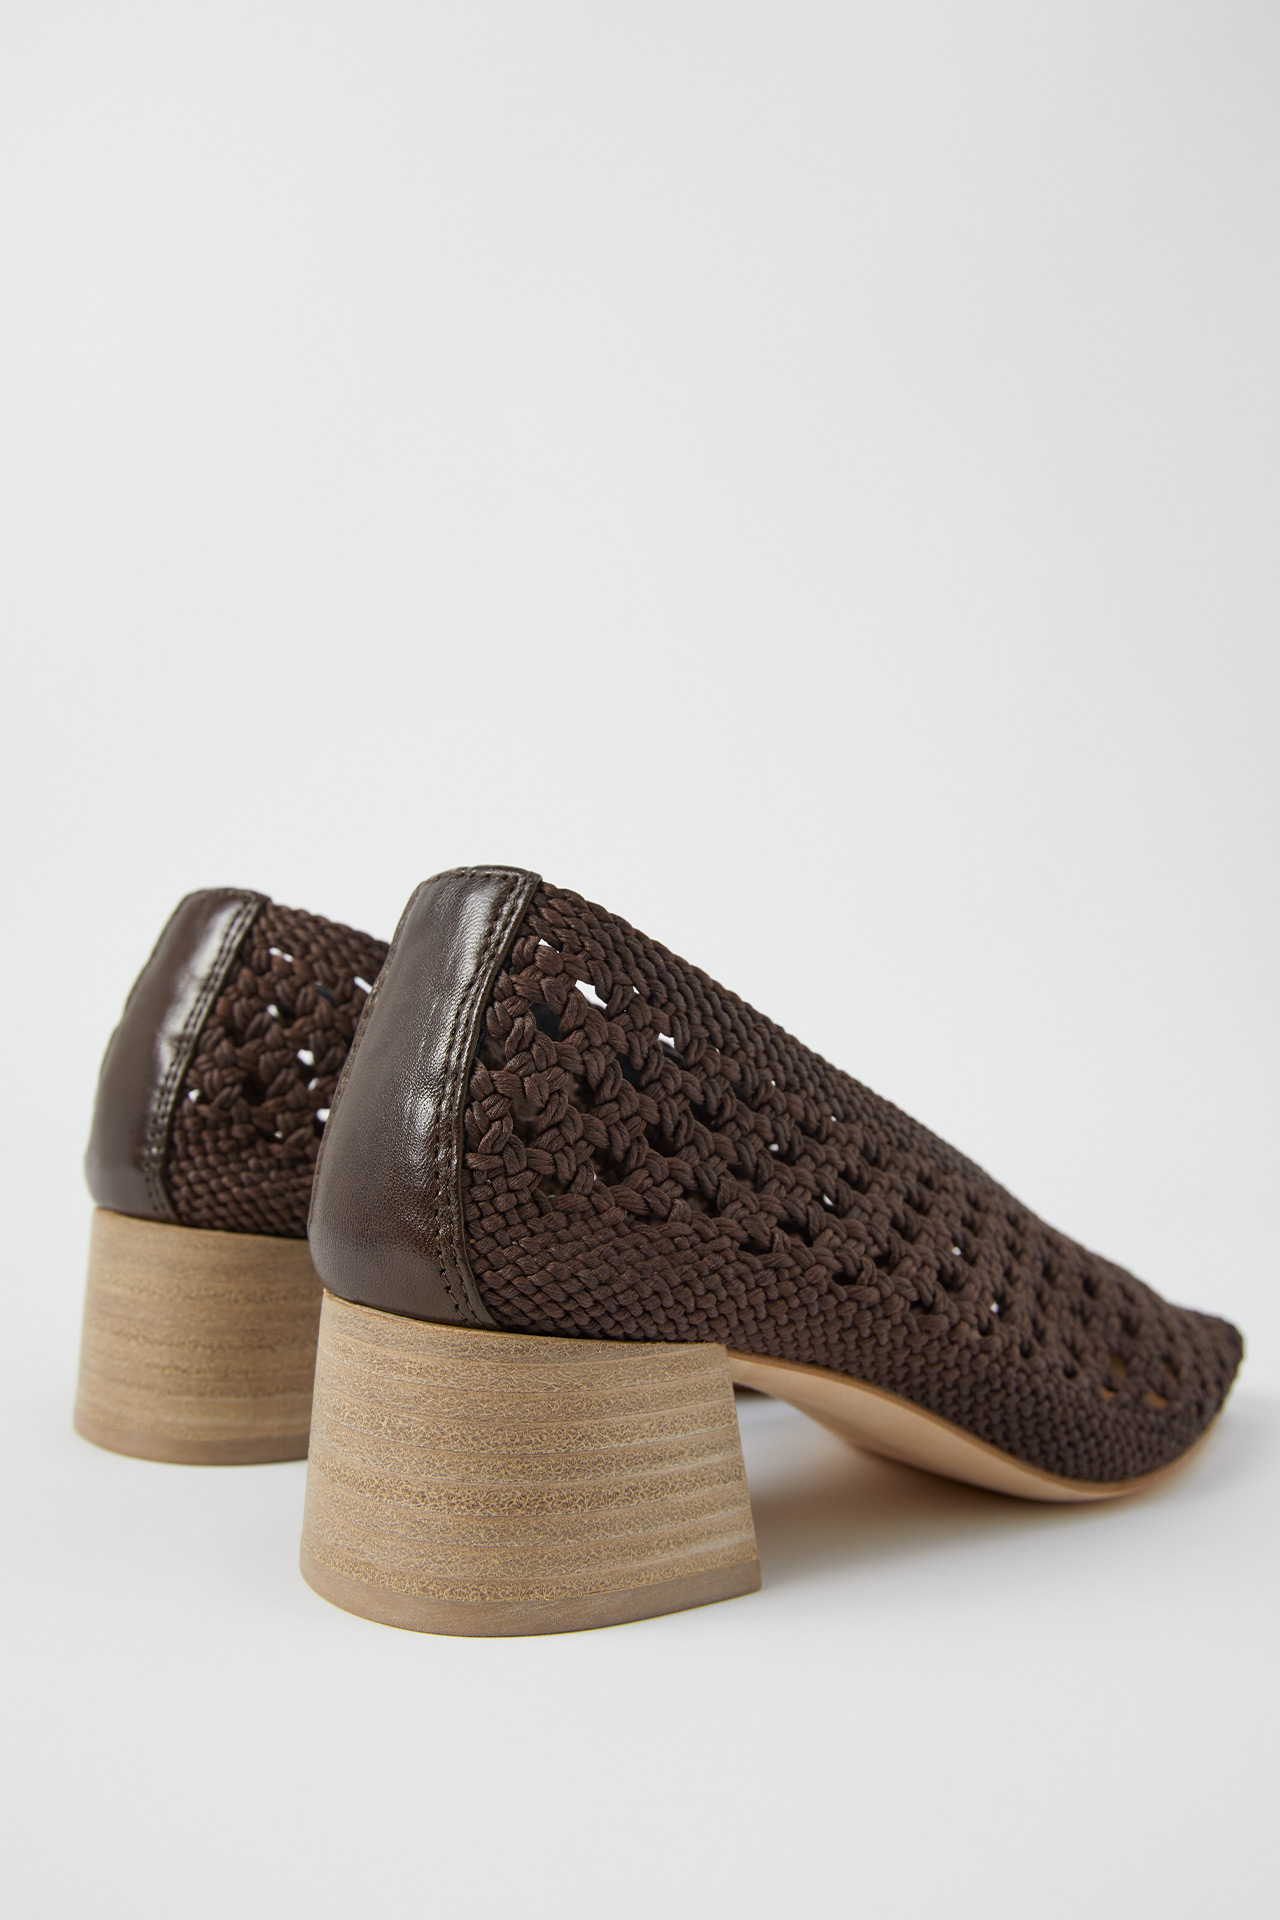 Taissa Brown Courts | Miista Europe | Made in Portugal